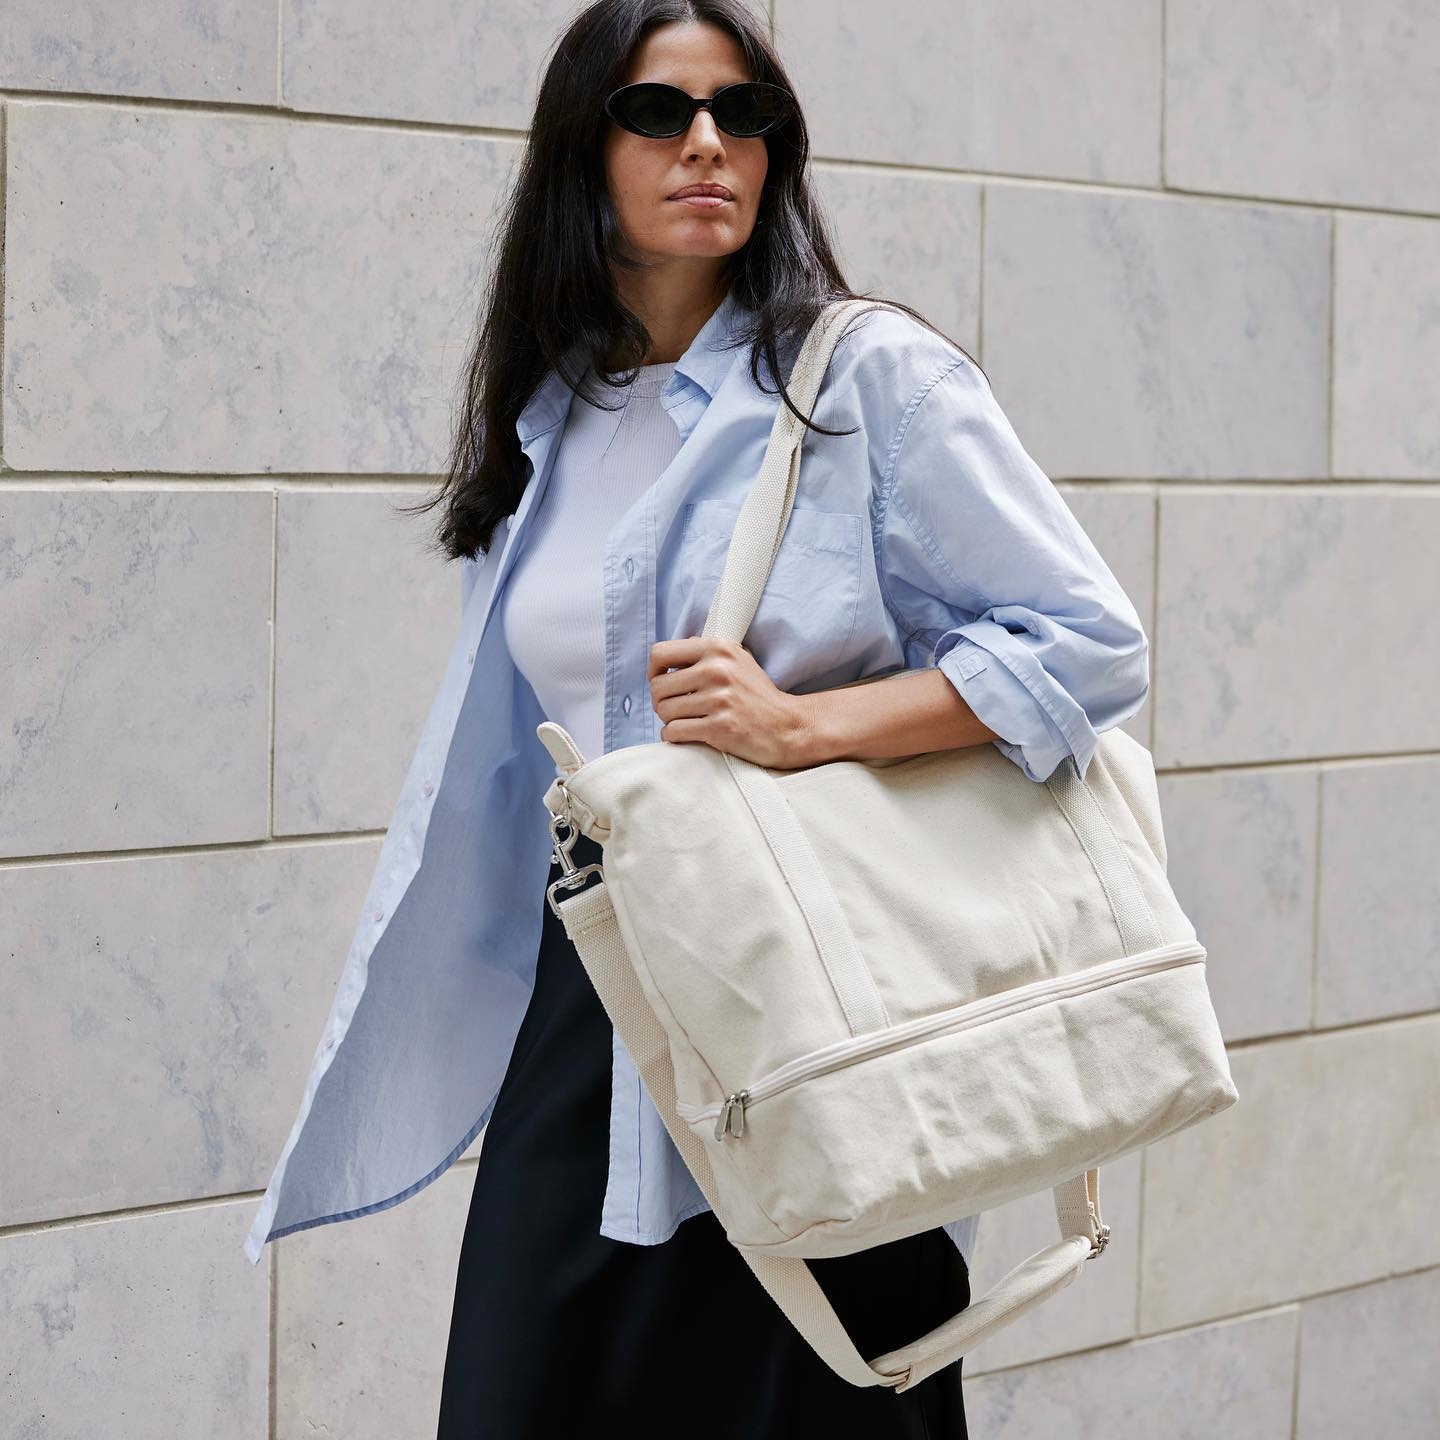 Photo from loandsons with the caption Every day errands >> gym sessions >> work >> travel. With an effortless style and lots of great features, Catalina Deluxe Tote pairs well with any of your tote bag needs.